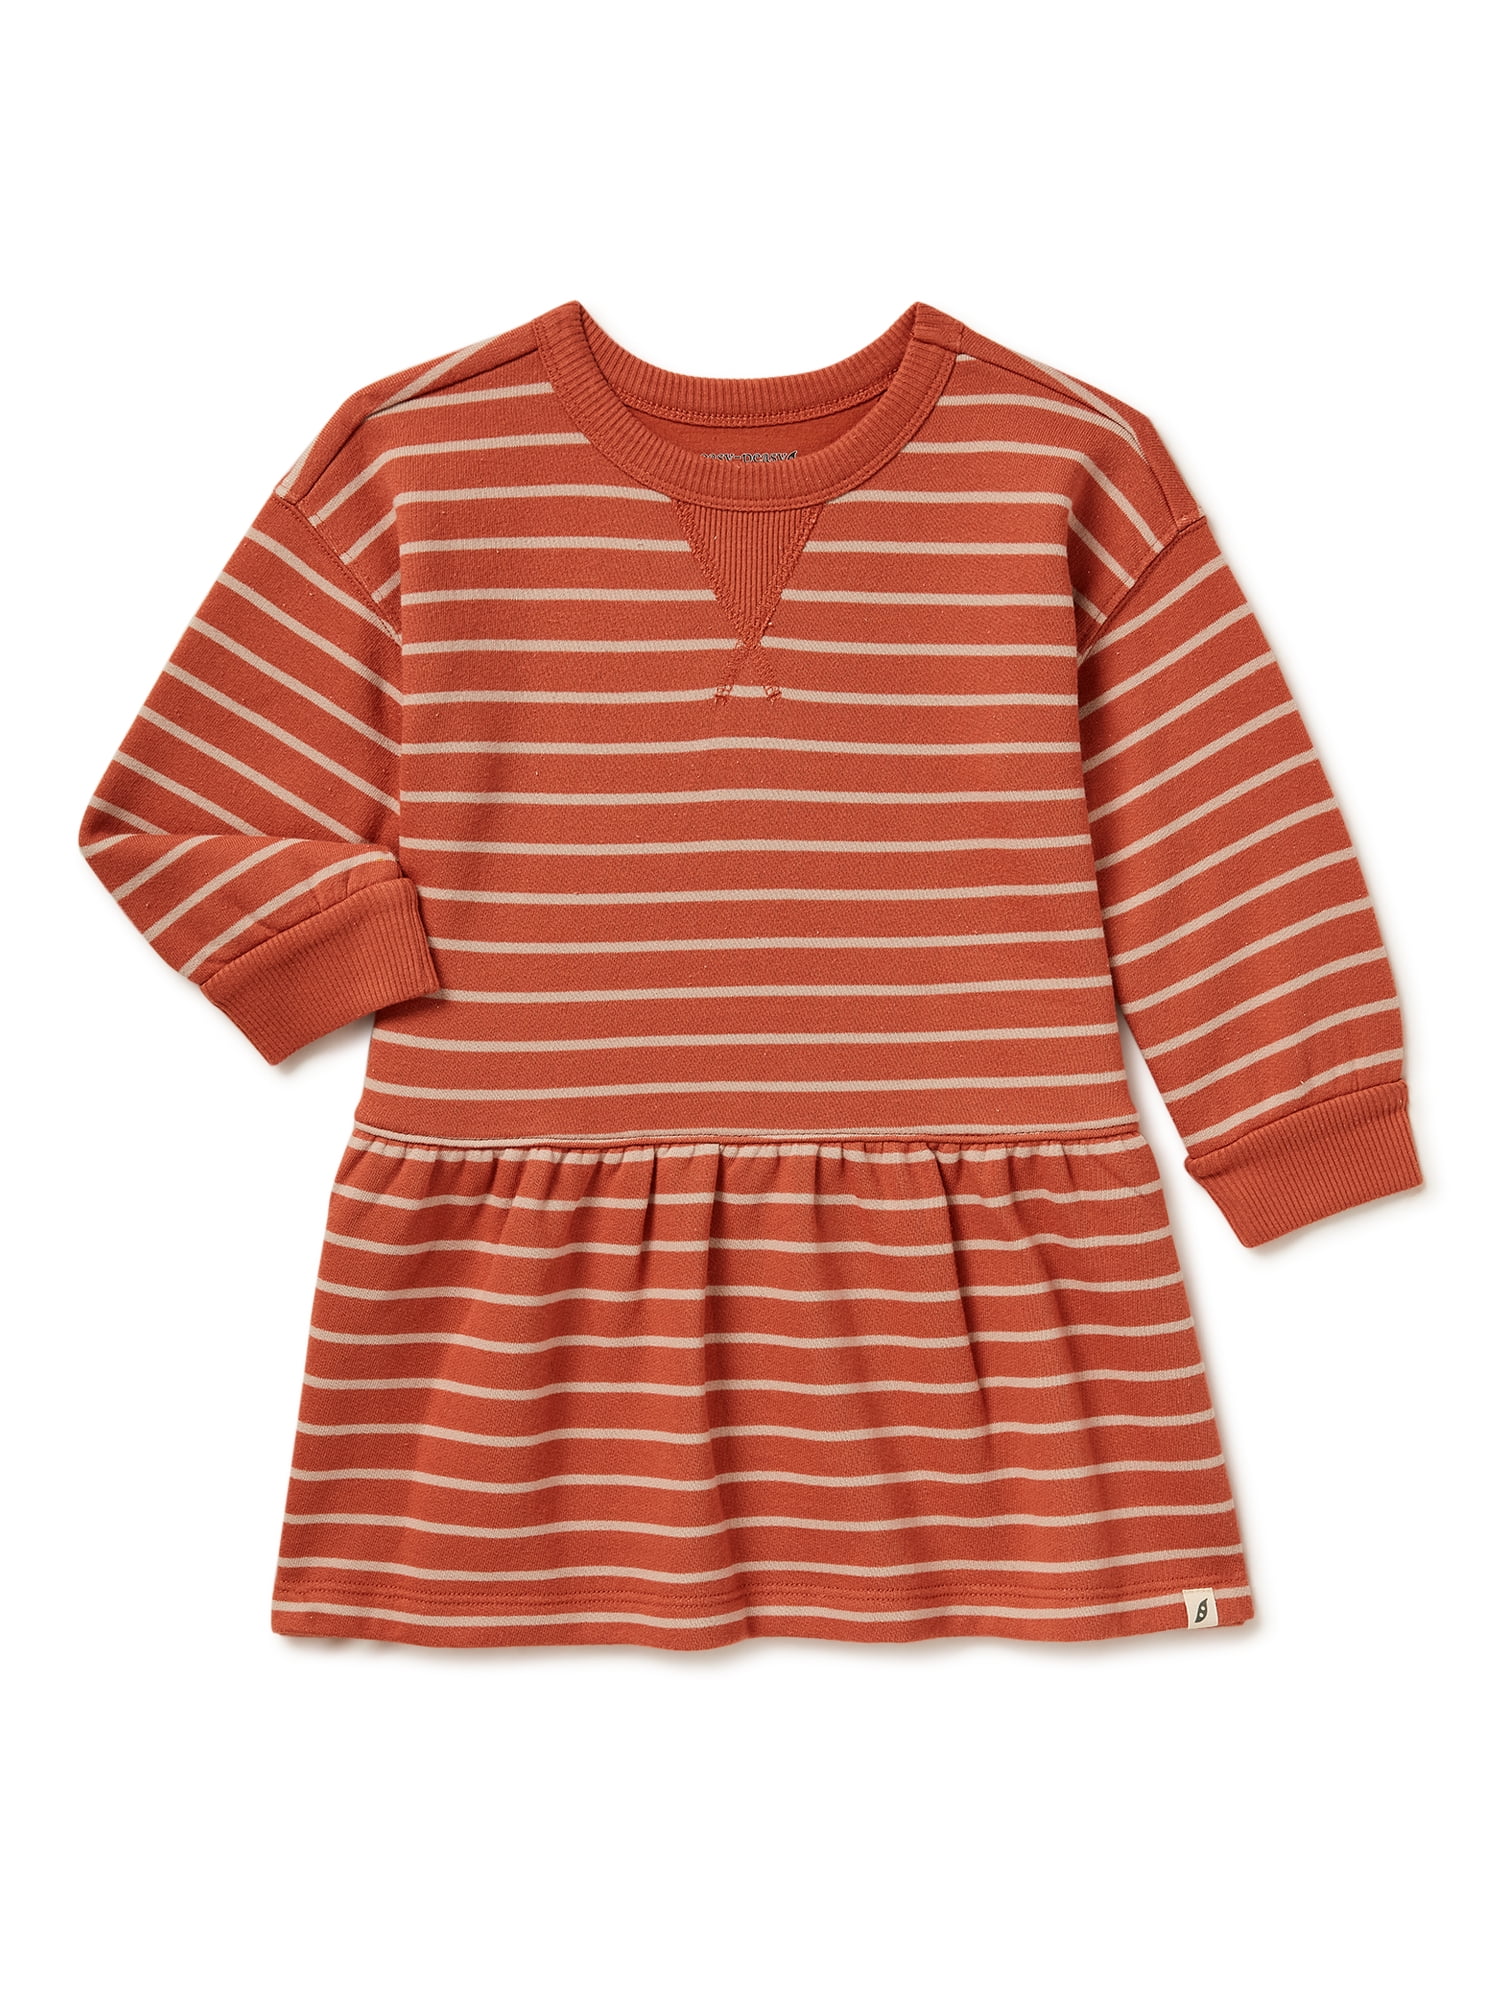 easy-peasy Baby and Toddler Girls' Stripe Sweatshirt Dress, Sizes 12 Months-5T